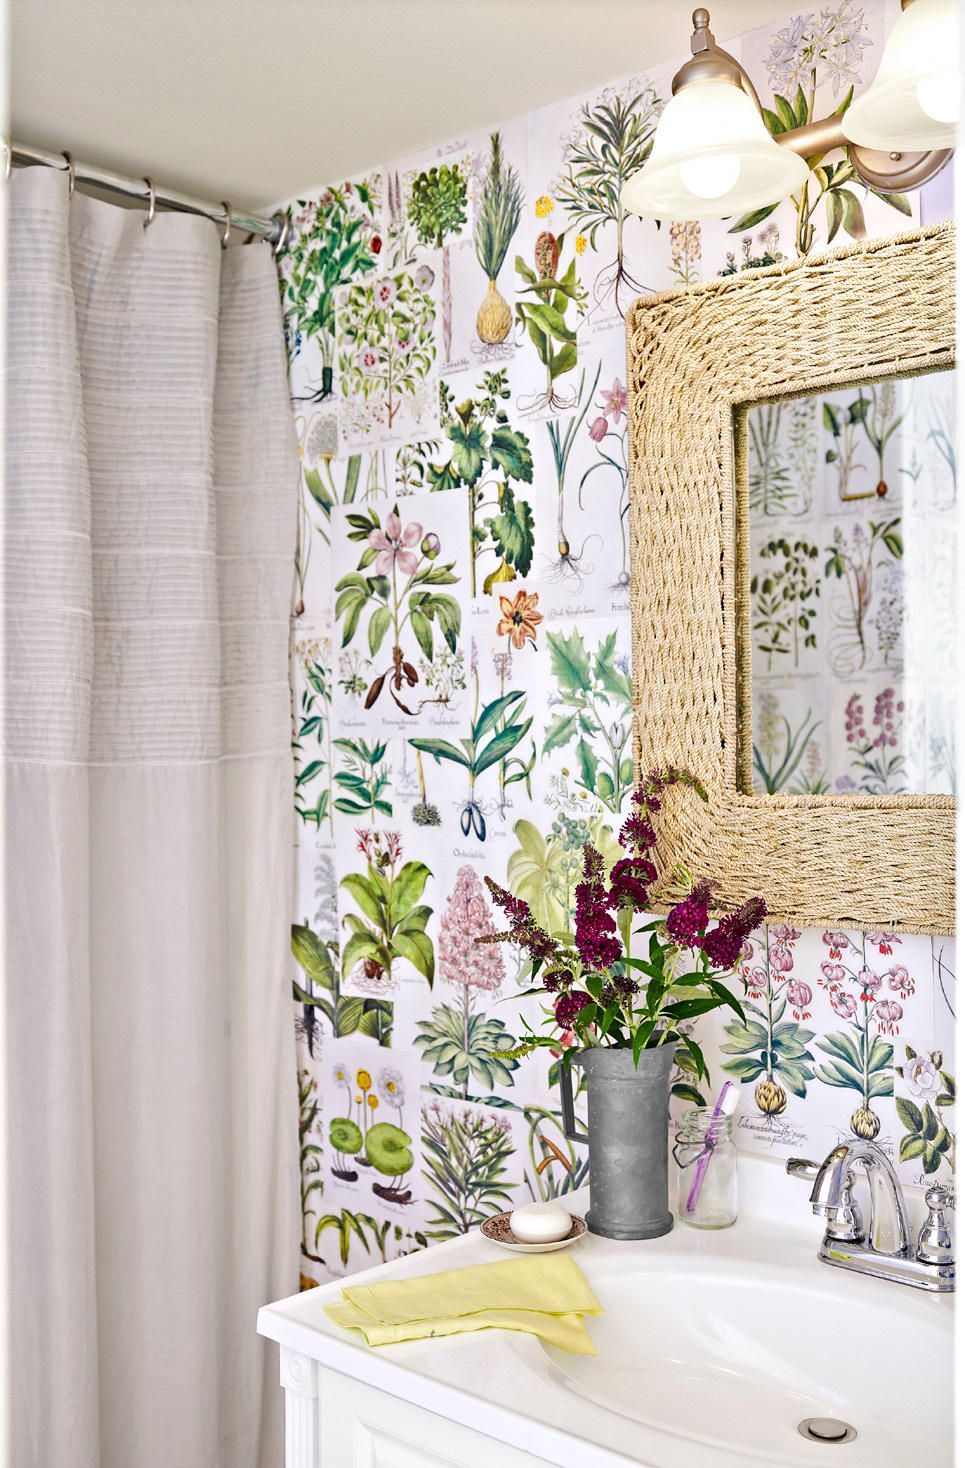 55 Bathroom Decorating Ideas Pictures, Powder Room Shower Curtain